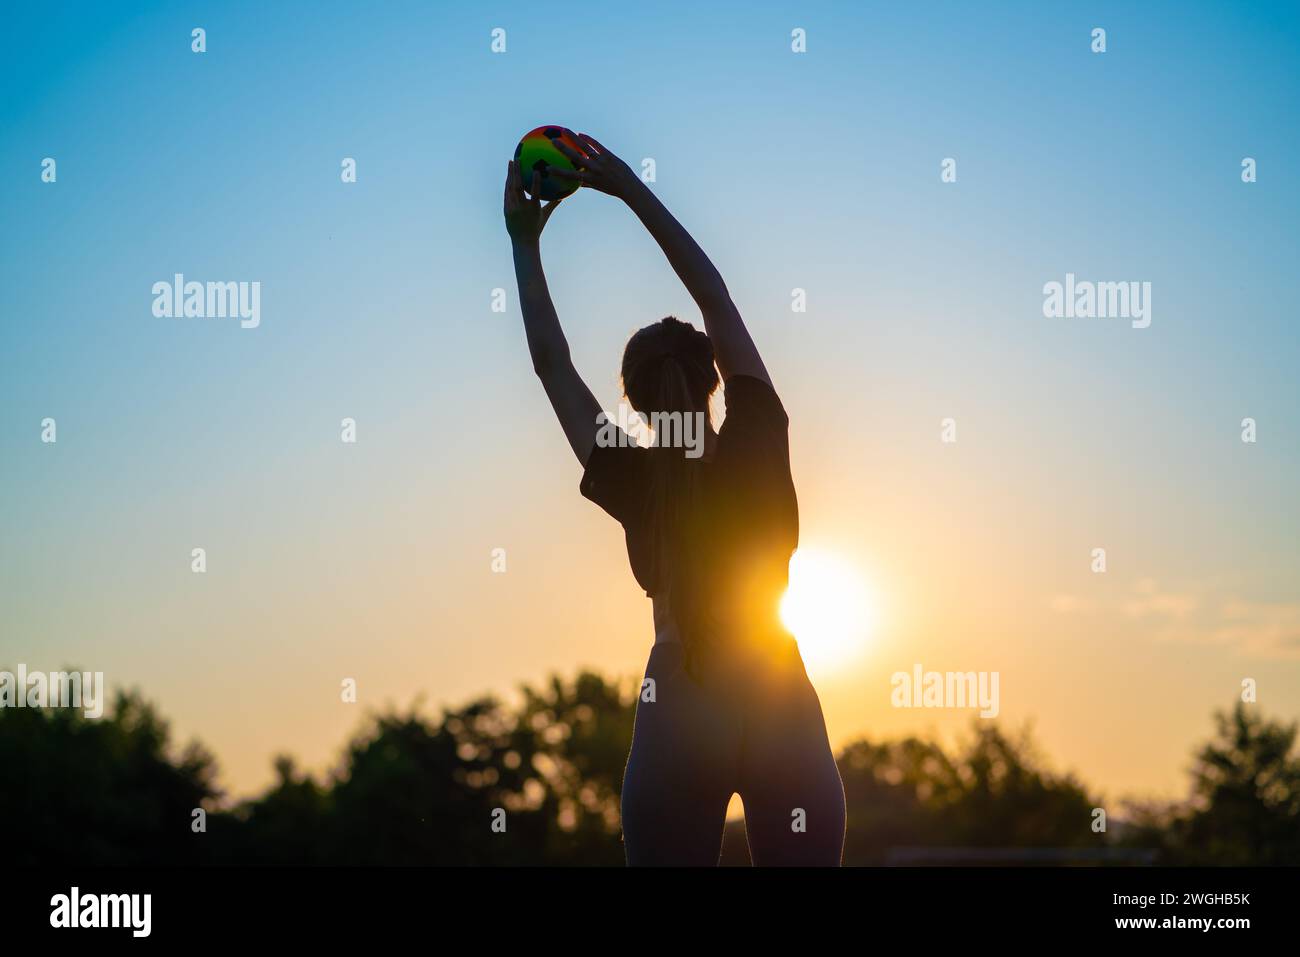 silhouette of a young woman doing gymnastics with a ball against the backdrop of the early rising sun One Person Silhouette Enjoying the Sunset on a B Stock Photo